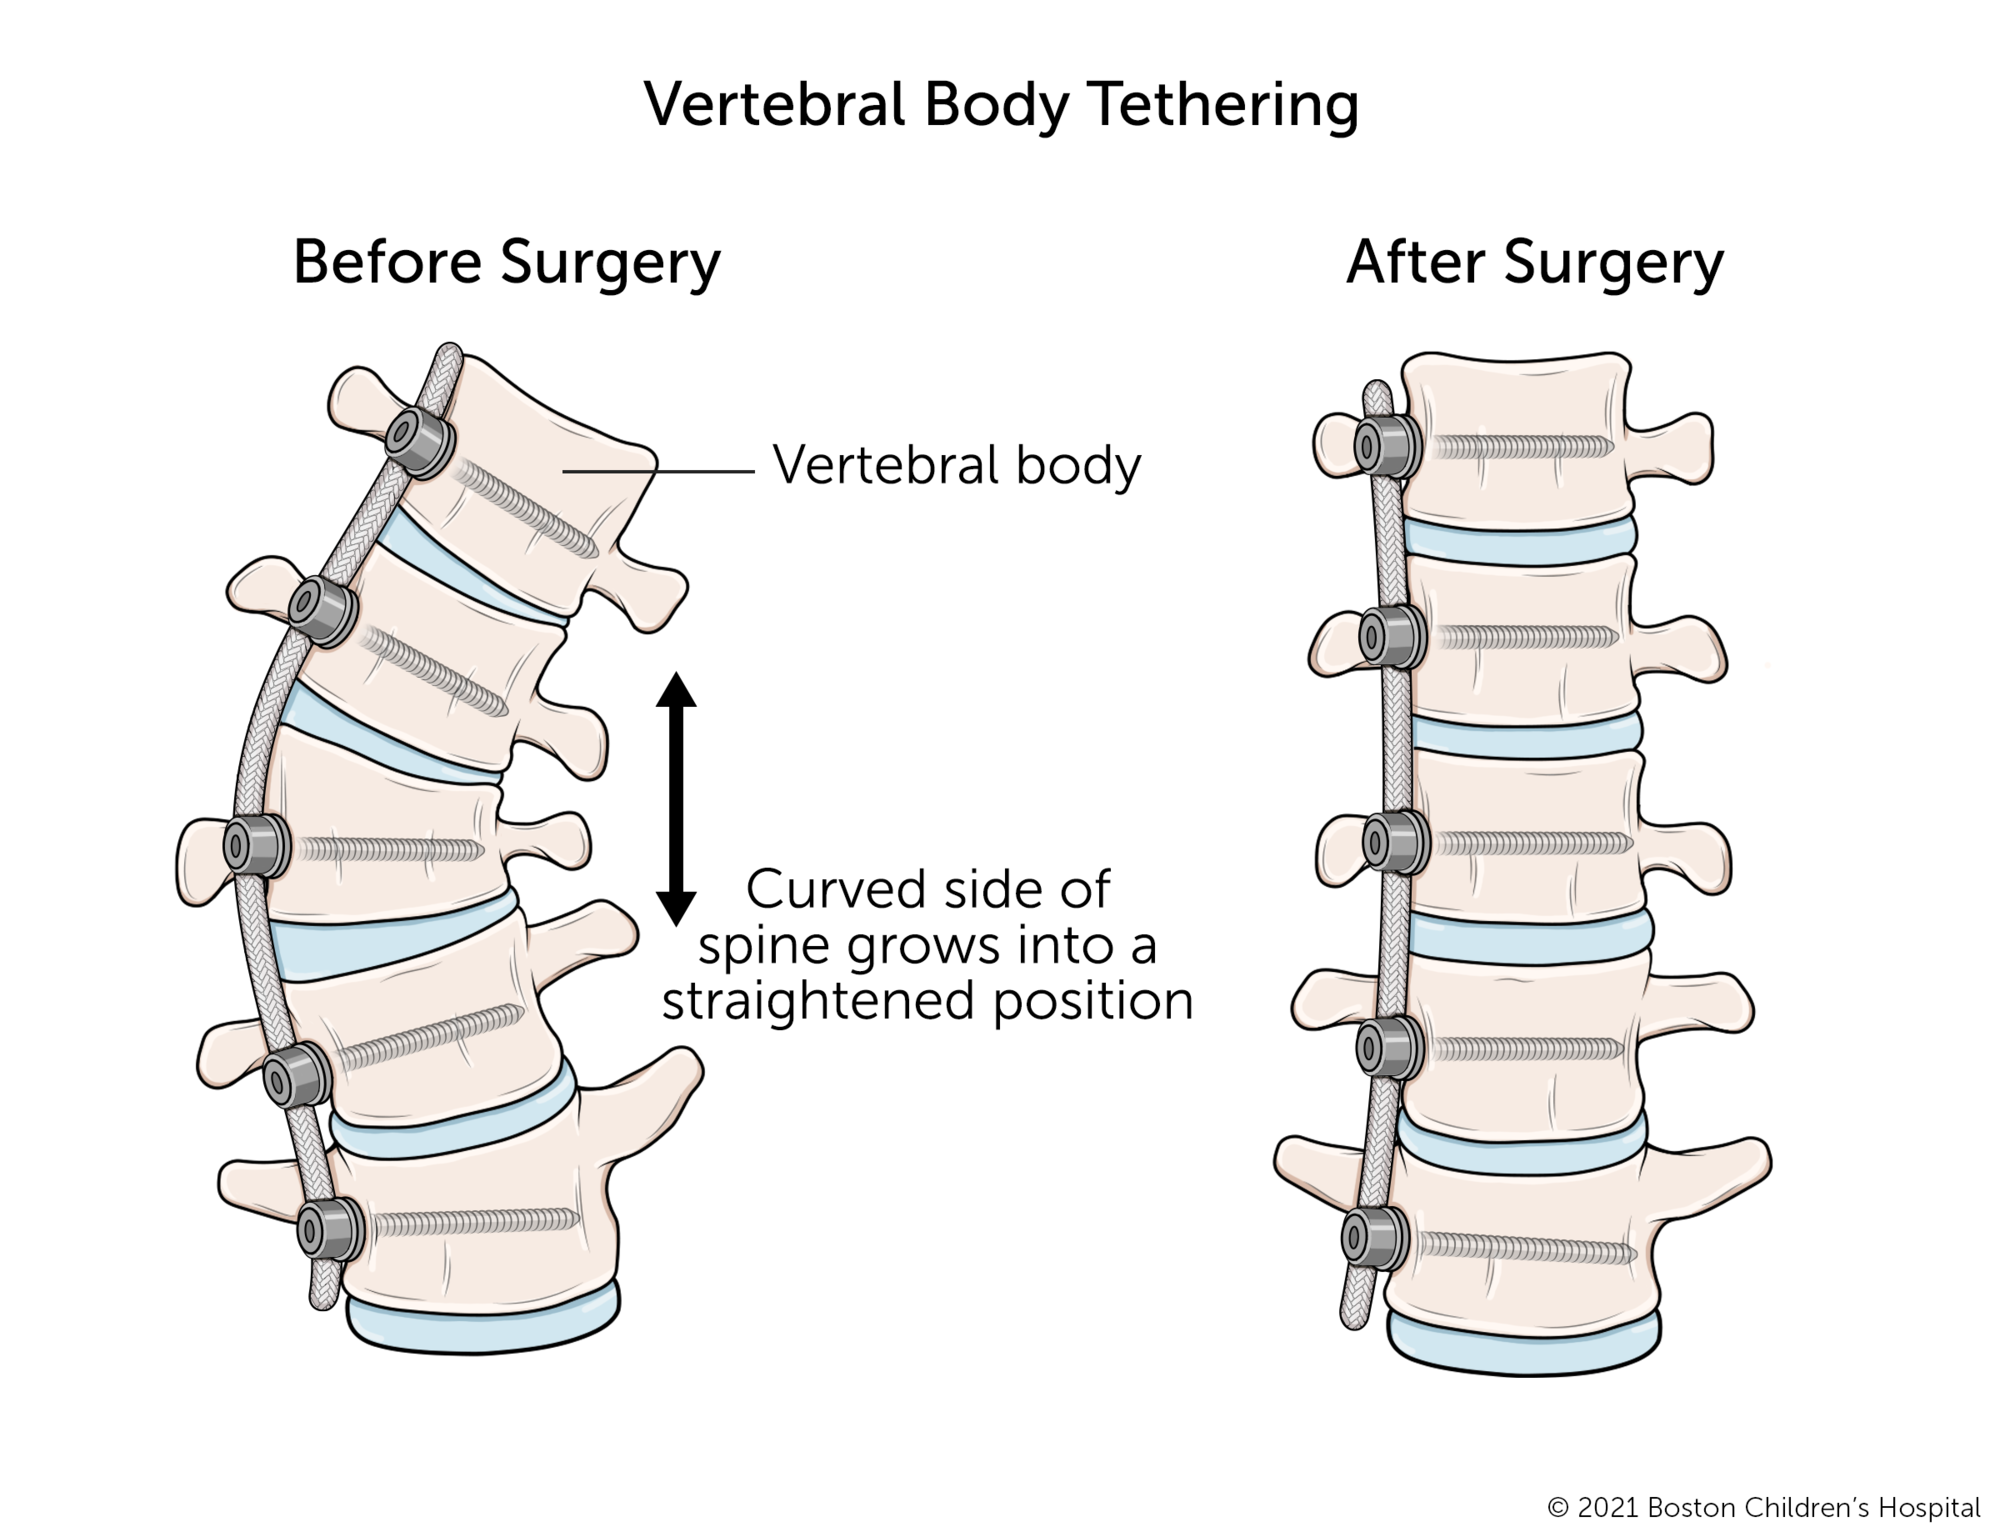 A before and after illustration of vertebral body tethering. Before the surgery, several vertebrae are shorter on one side than the other. After surgery to attach the tether to the curved side of the spine, the vertebrae grow into even shapes and the spine becomes straighter.